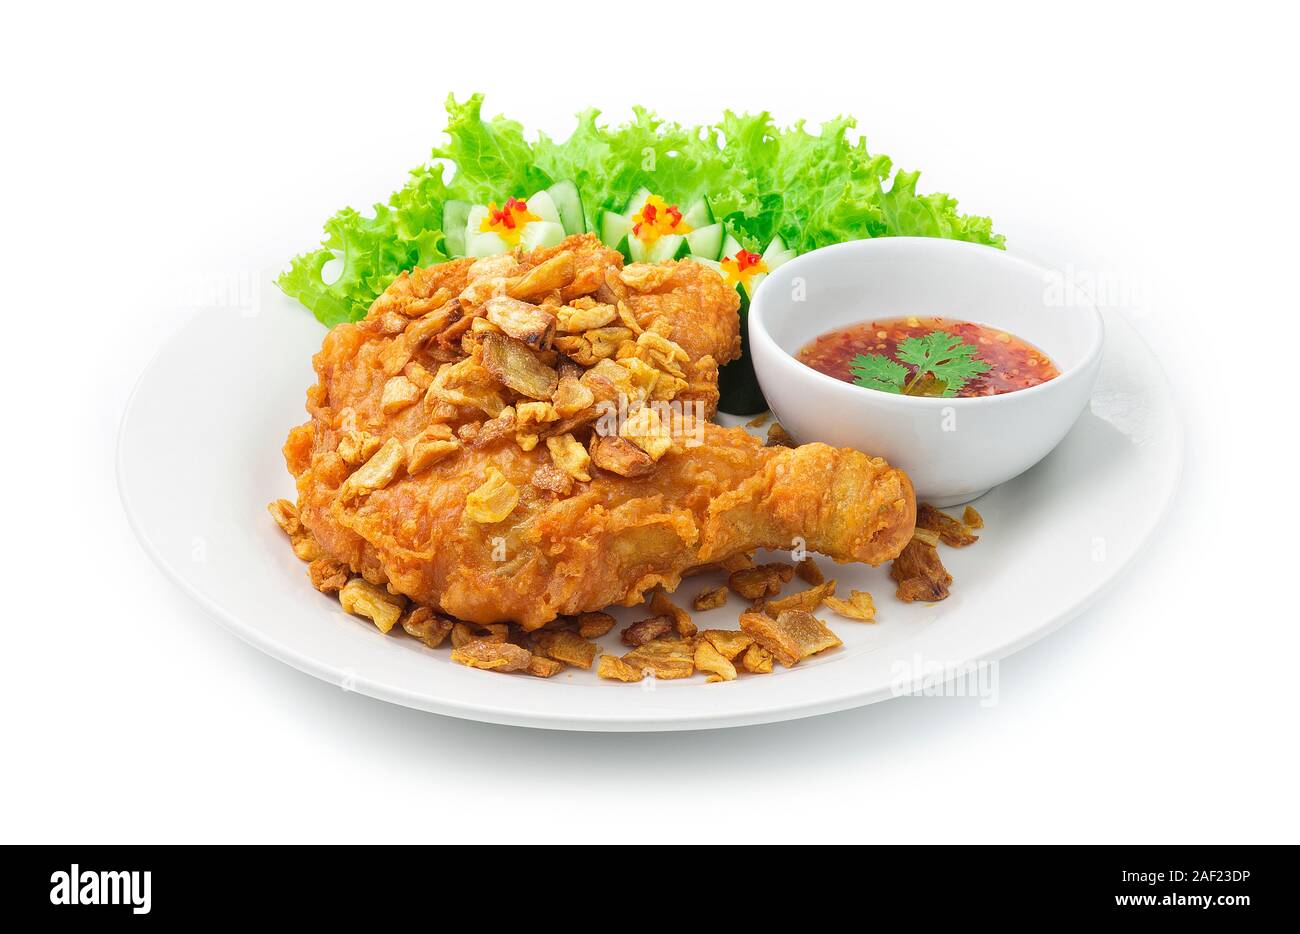 Fried Chicken Thigh Crispy Skin Topped Crispy Garlic Asian Food fusion style decorate carved cucumber Served Sweet Chili Sauce Thai Food Style side vi Stock Photo